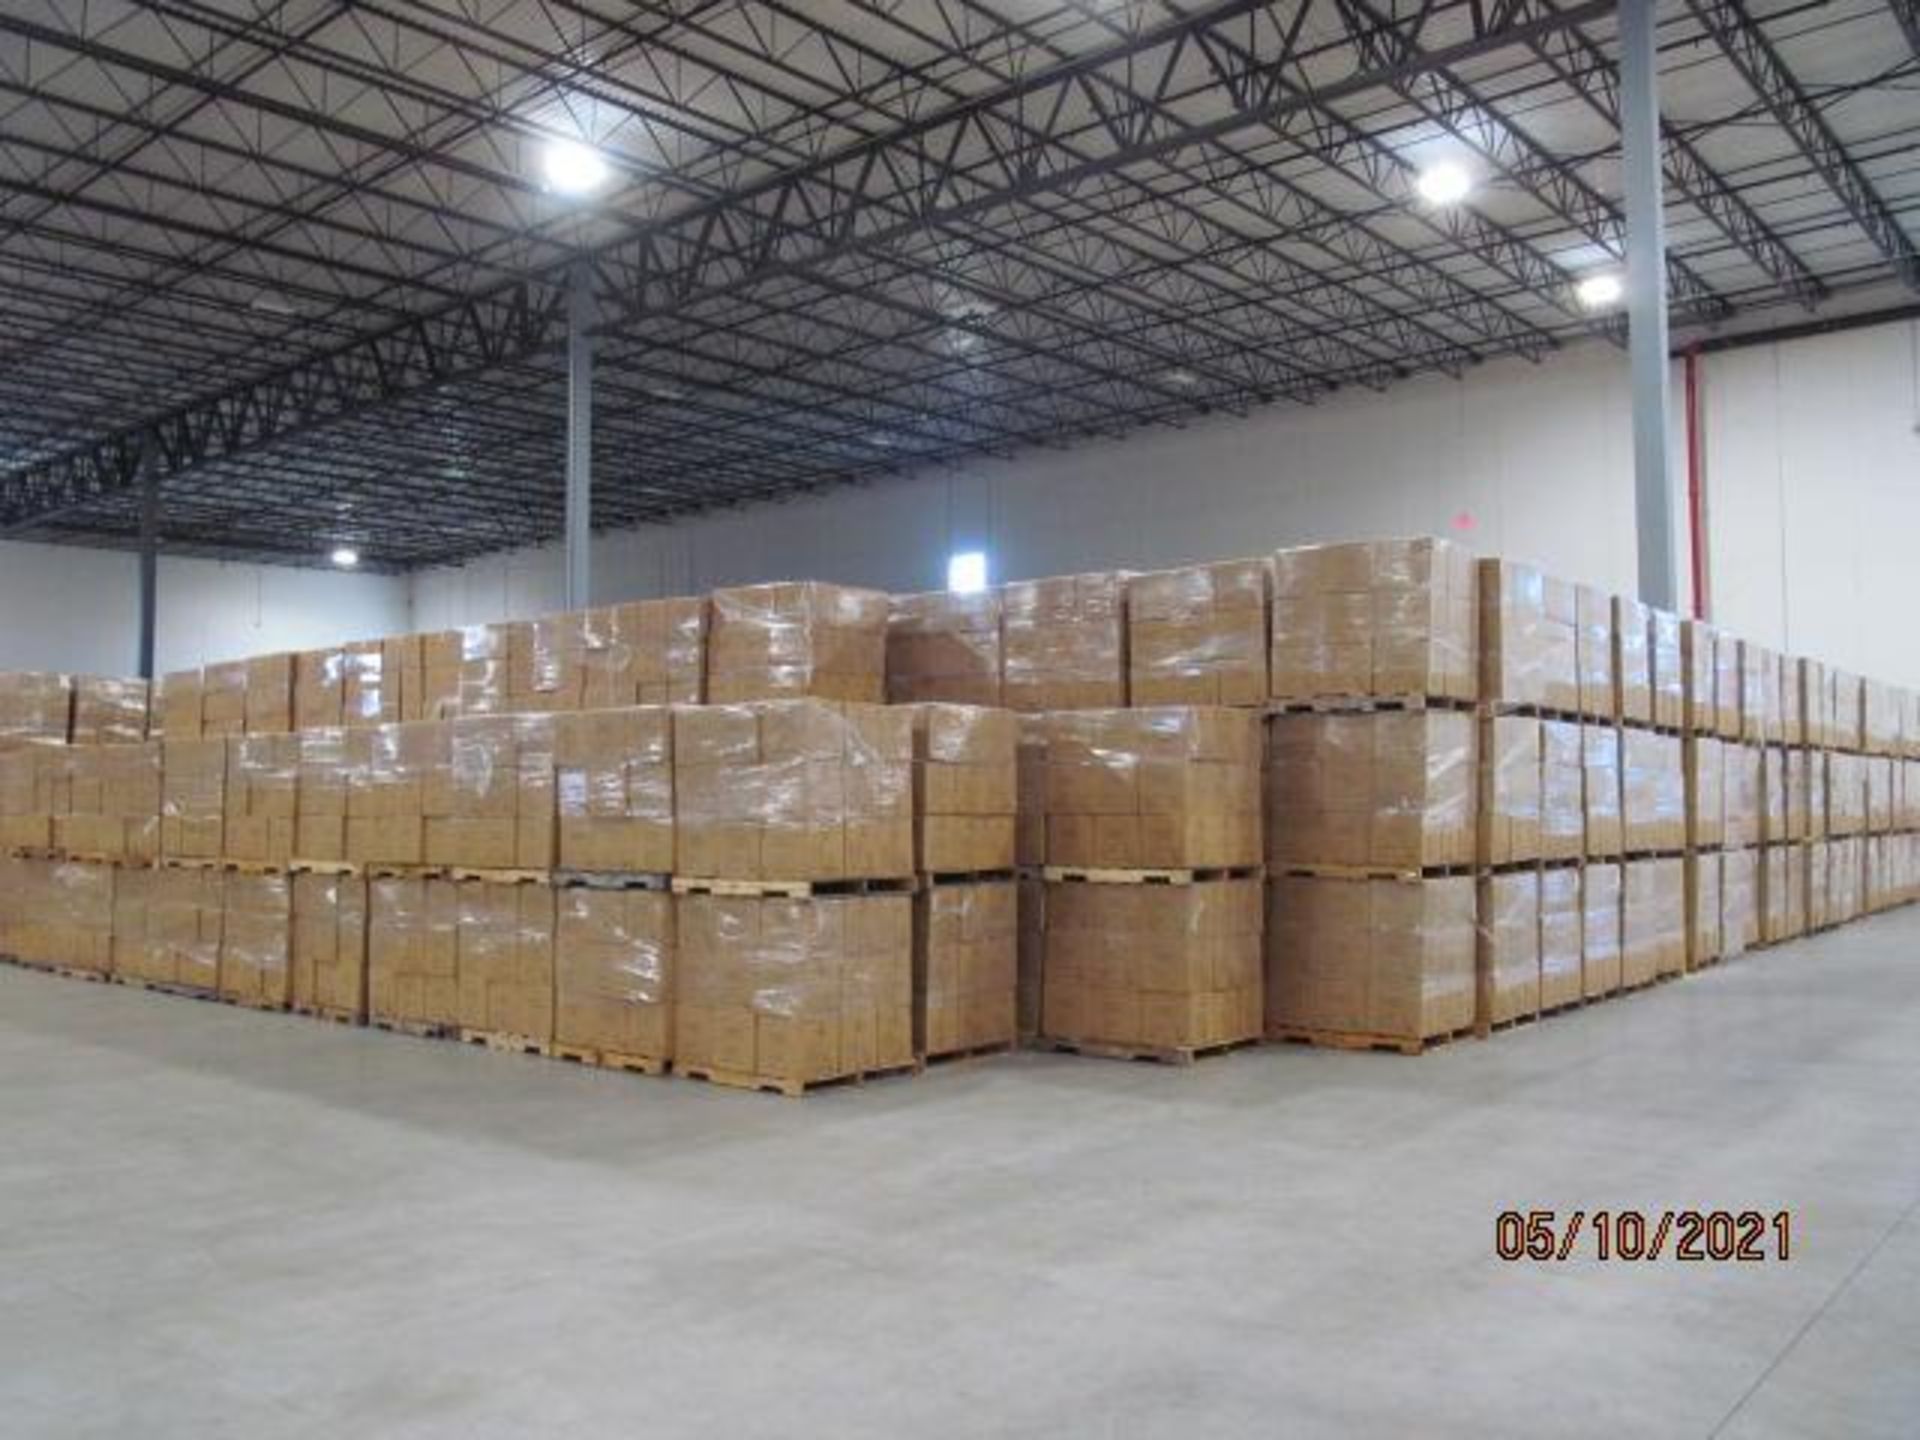 Lot of Waxman Kleen Freak Sanitizing Wipes consisting of 12,960 packages on 20 pallets. Each package - Image 11 of 11